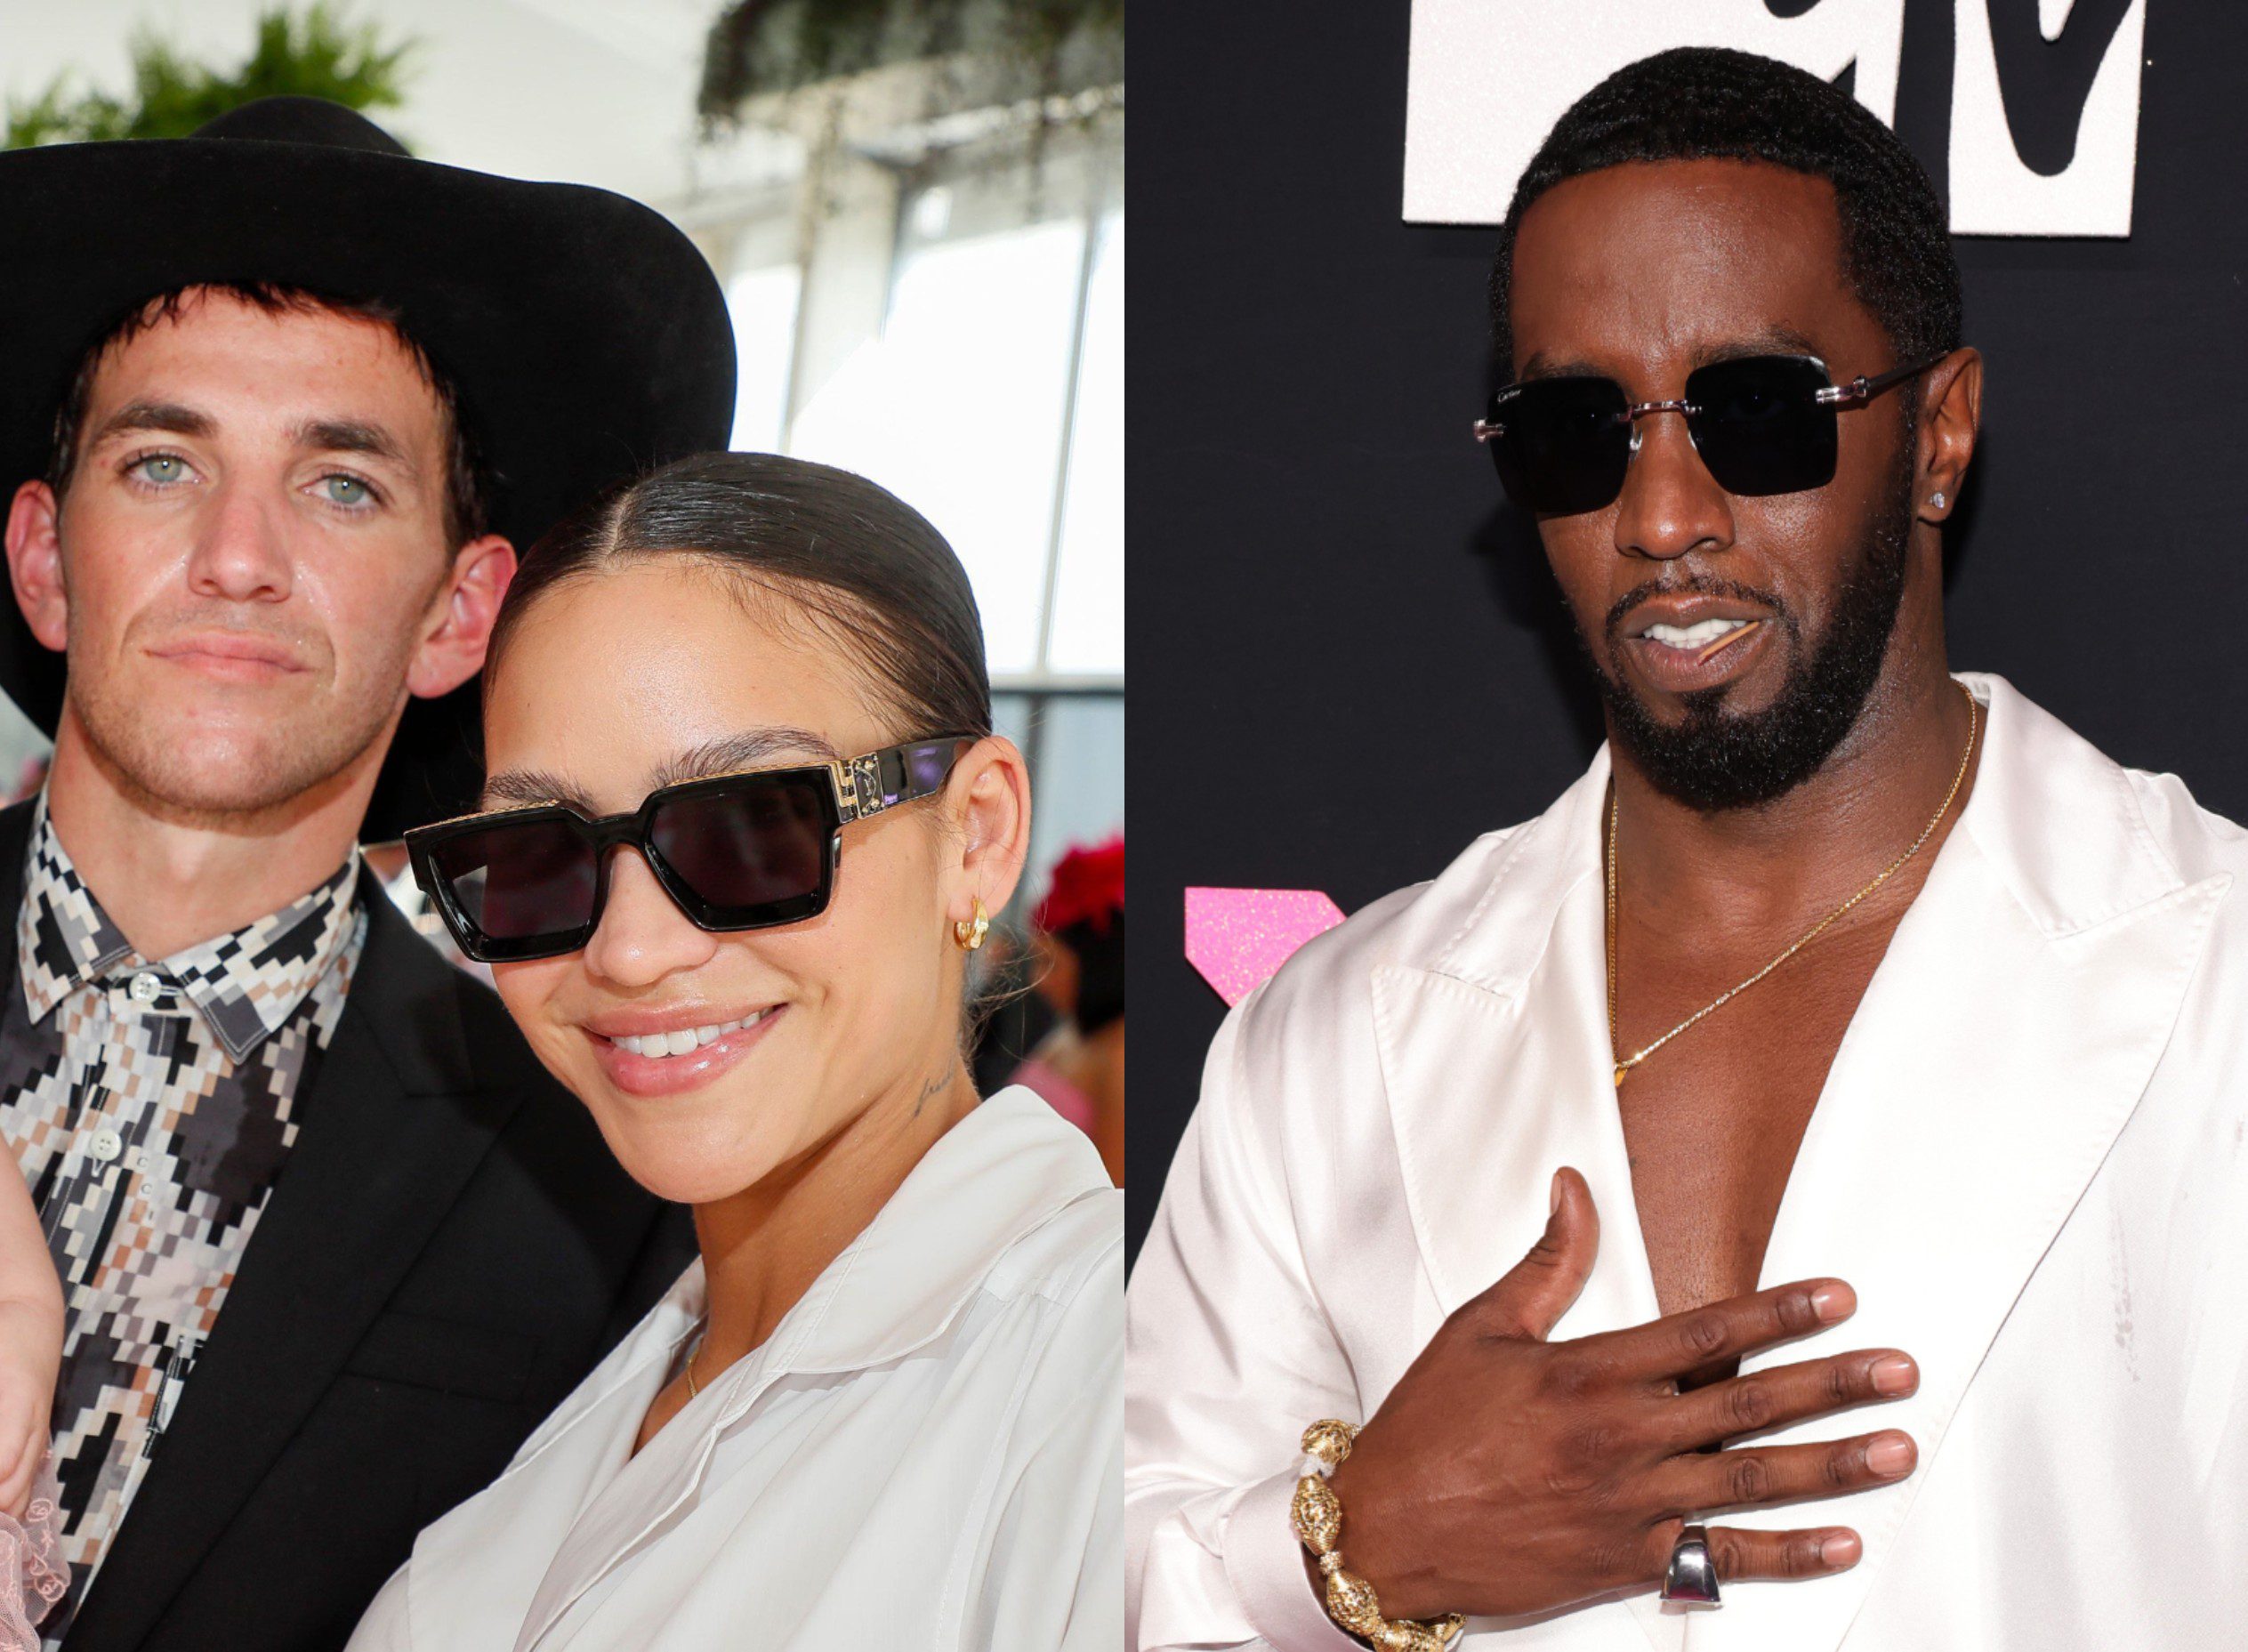 Cassie’s Husband Alex Effective Calls Diddy “Previous & Fruity” In Remark